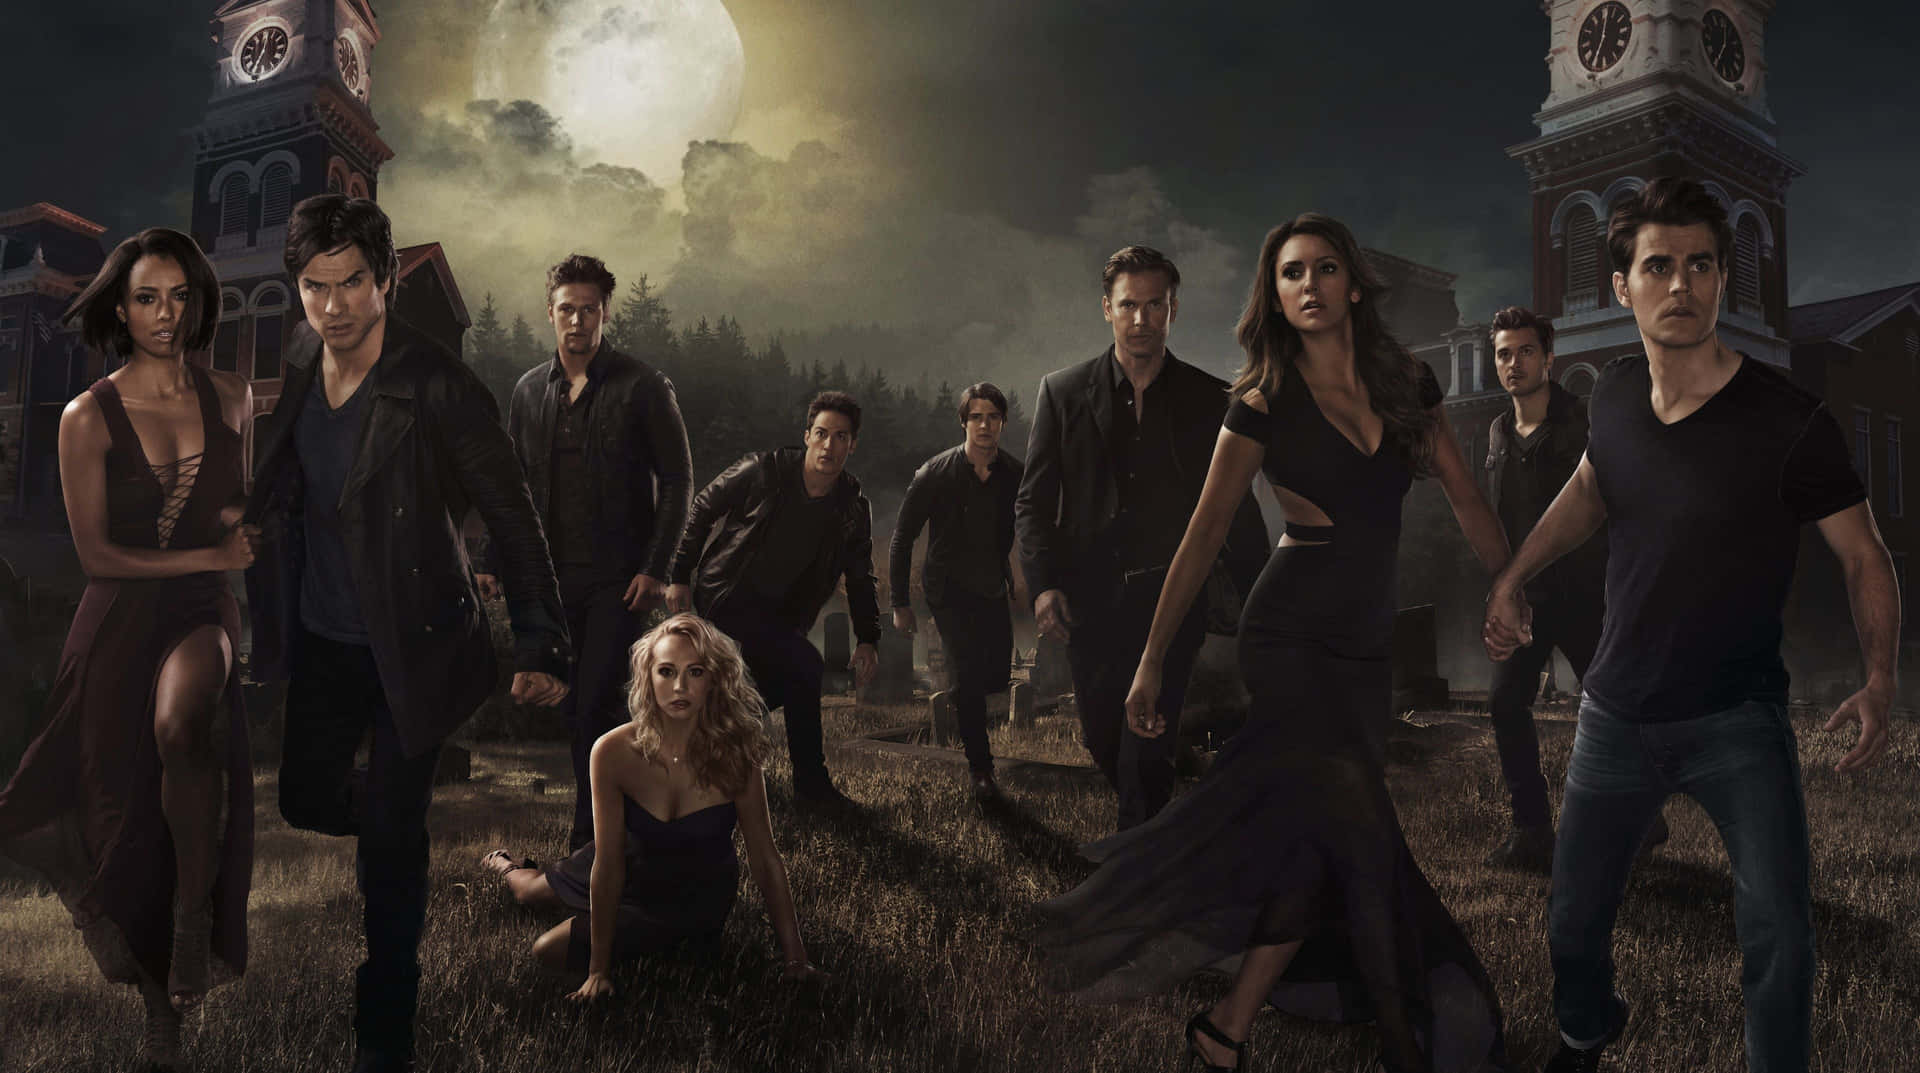 Get ready to enter the world of The Vampire Diaries with this ultra-modern iPhone Wallpaper